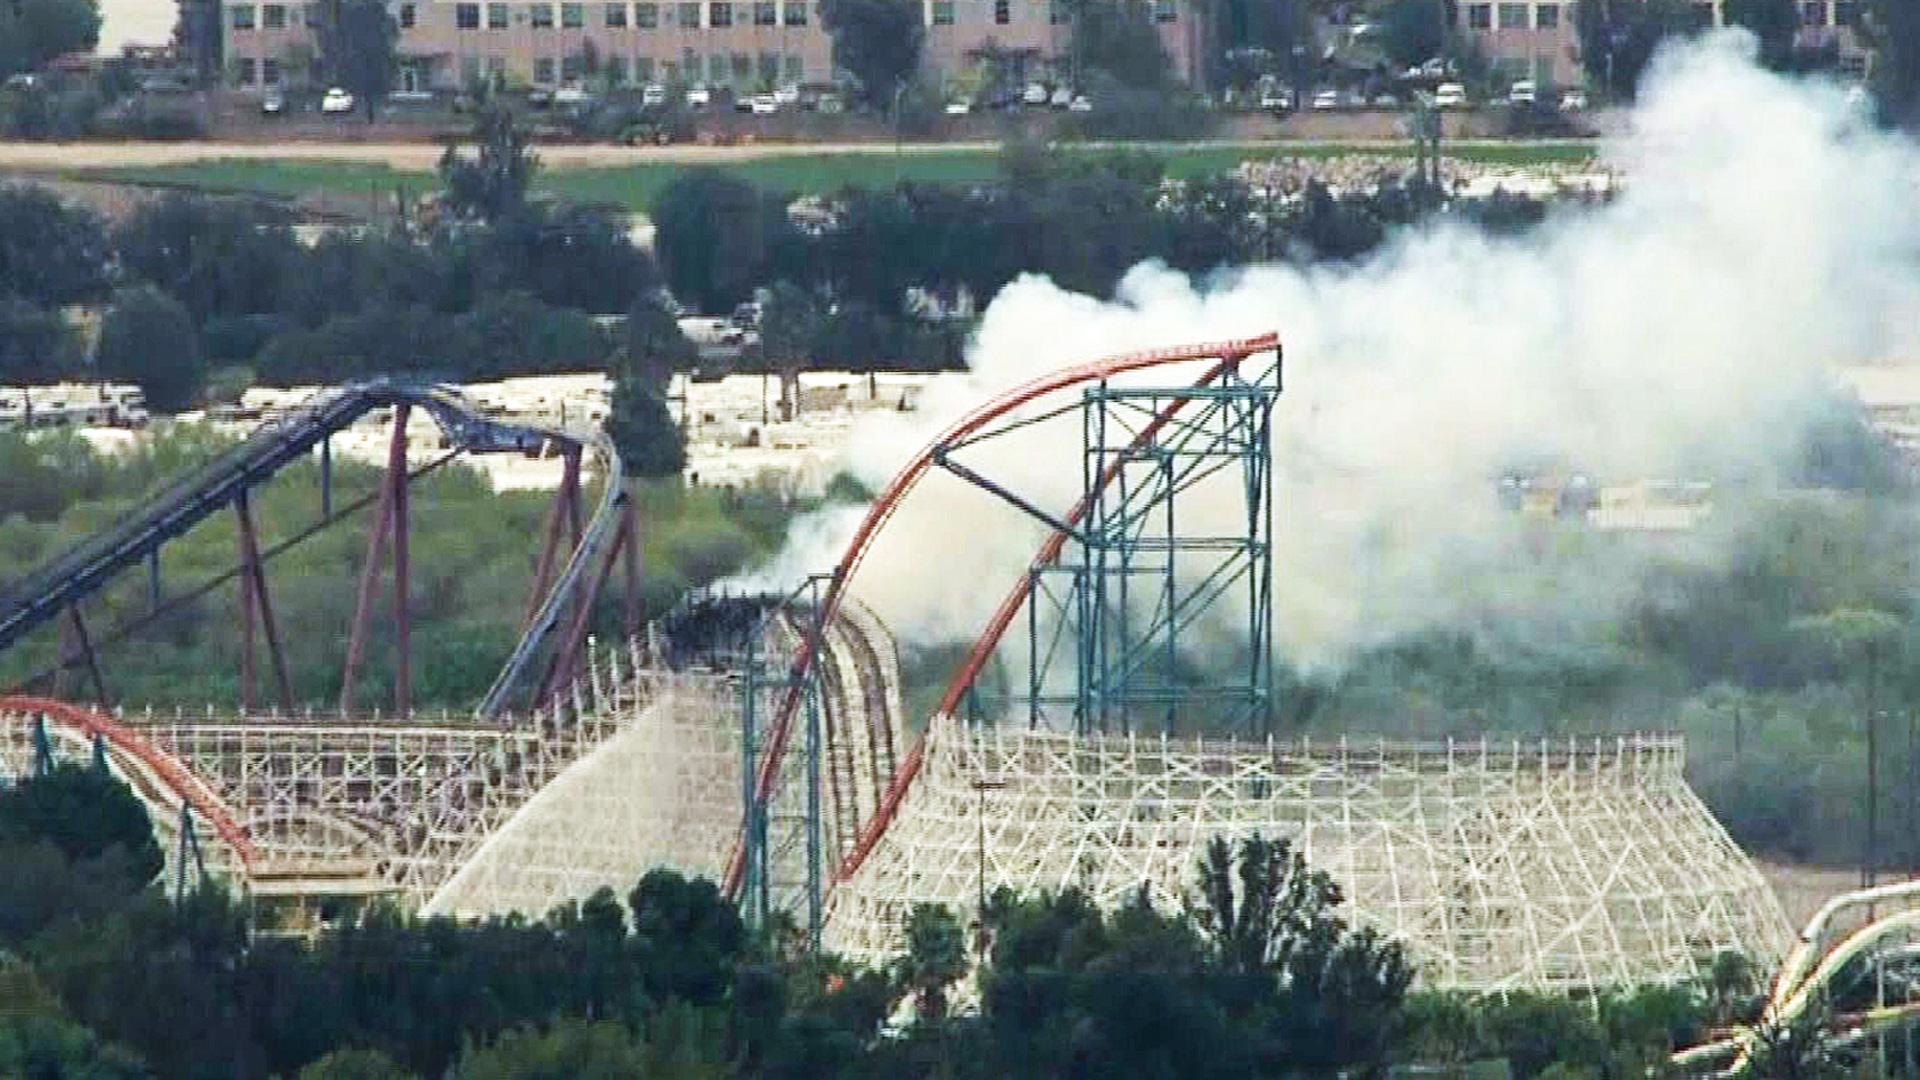 An Out Of Service Roller Caught Fire At Six Flags, And The Photo